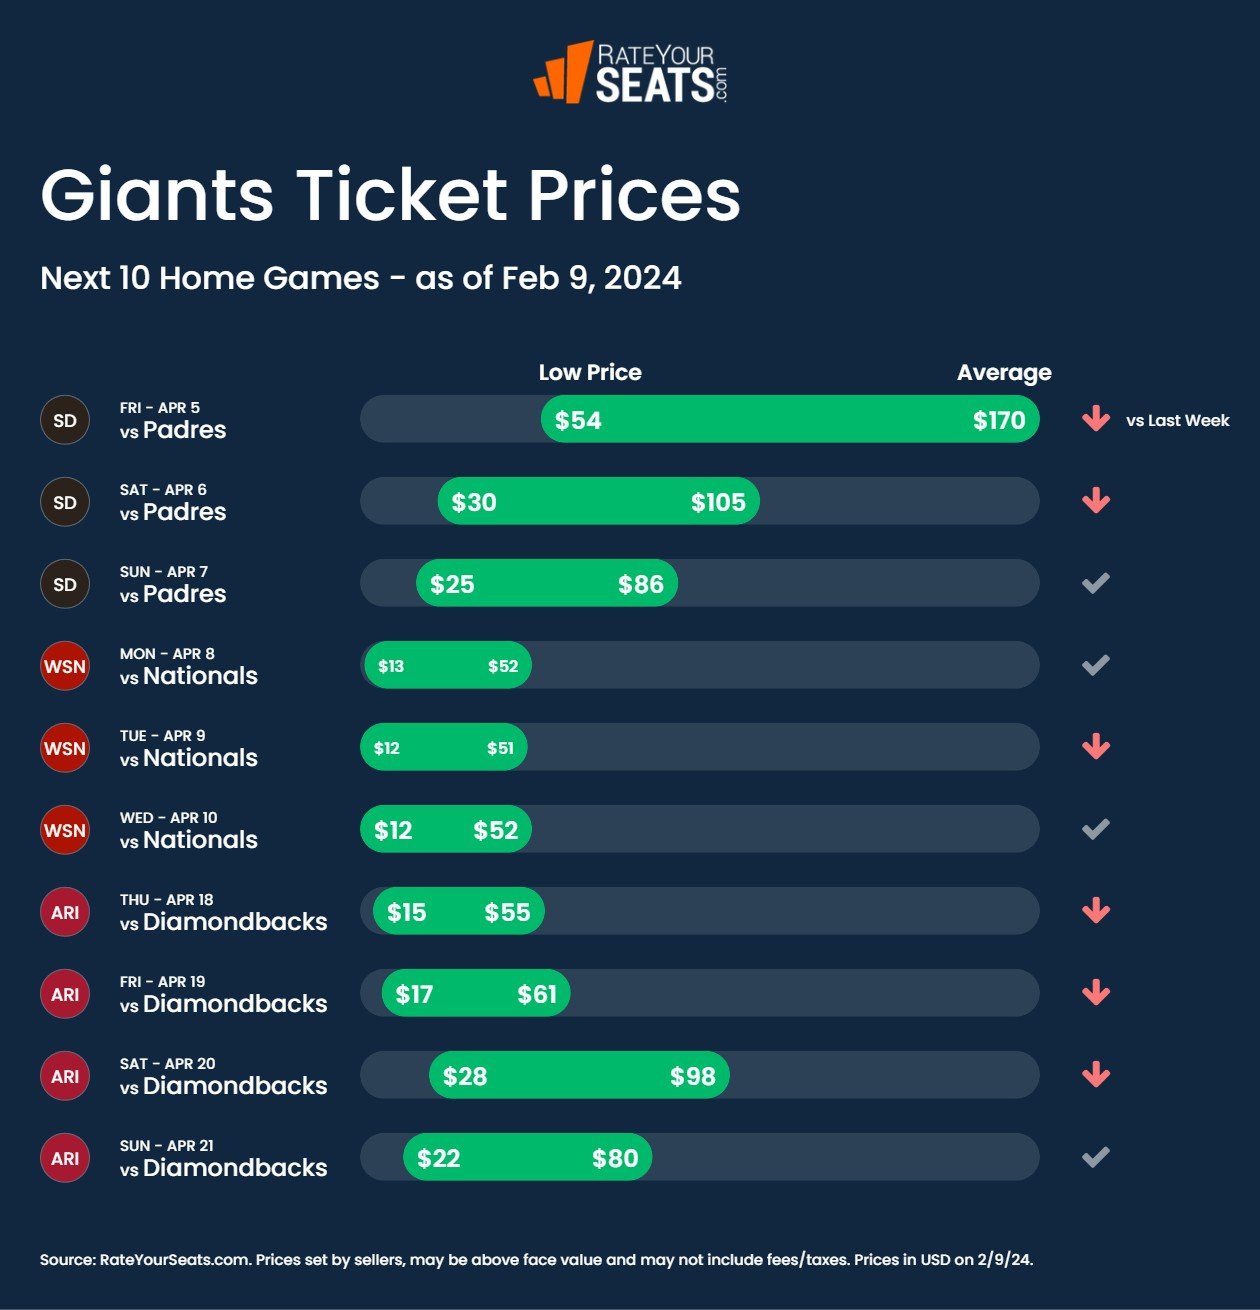 Giants tickets pricing week of February 9 2024